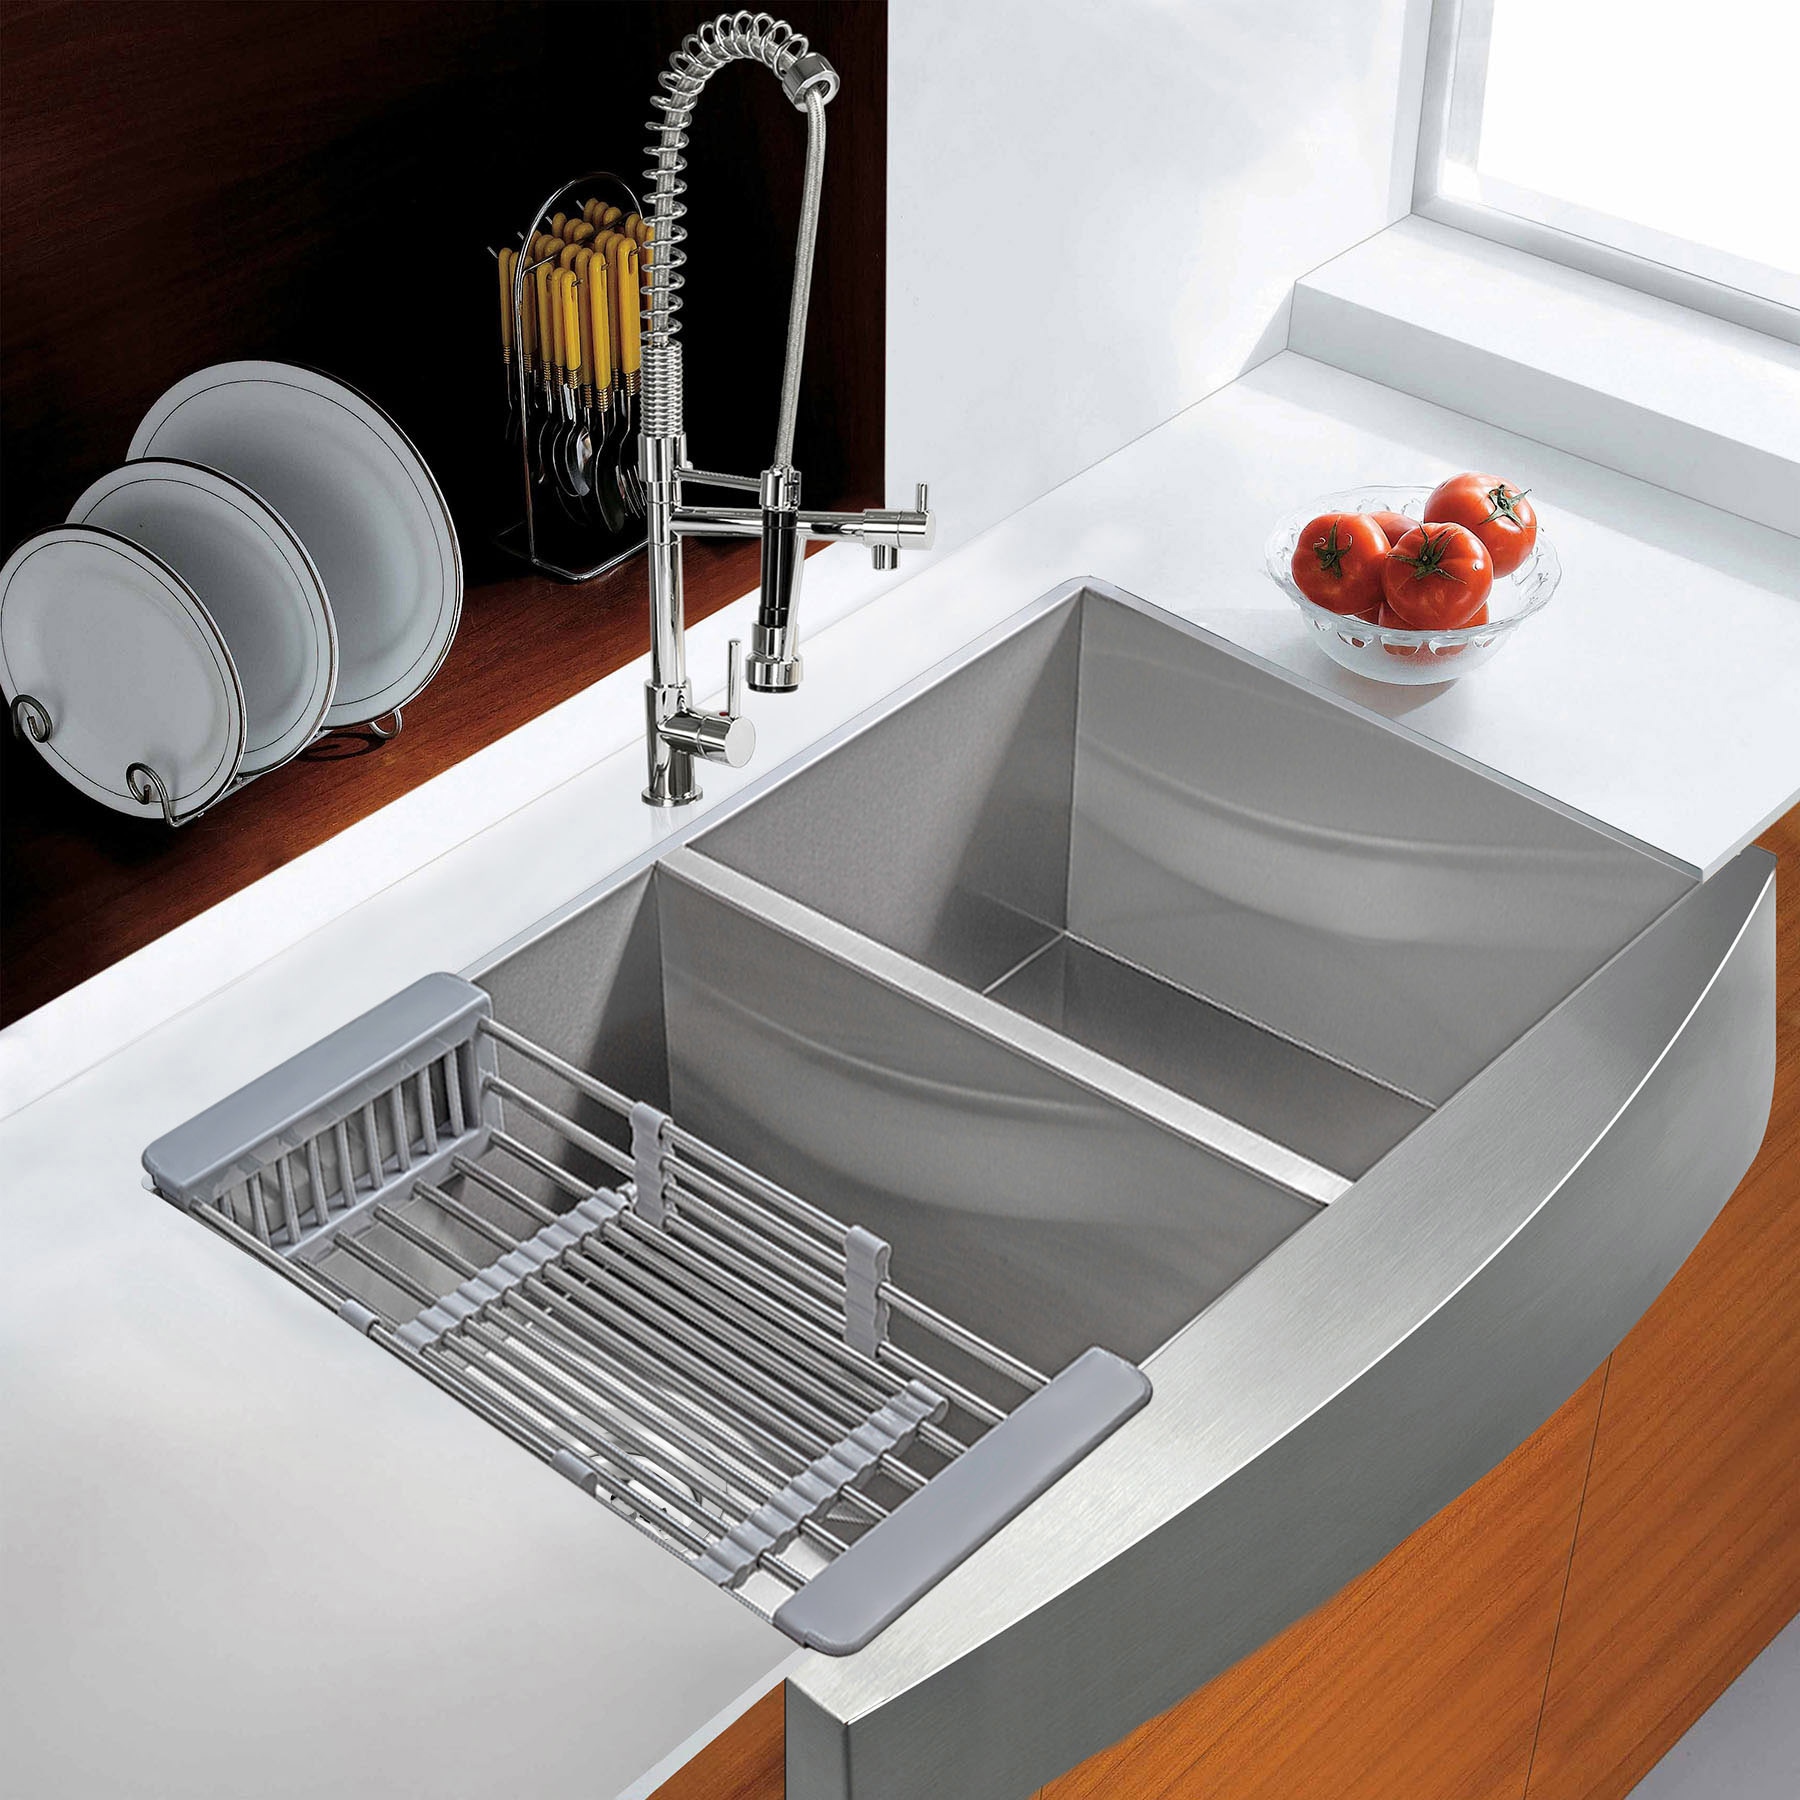 Dish Drying Rack in Sink - Dual-Use for Countertops & Sinks Stainless Steel